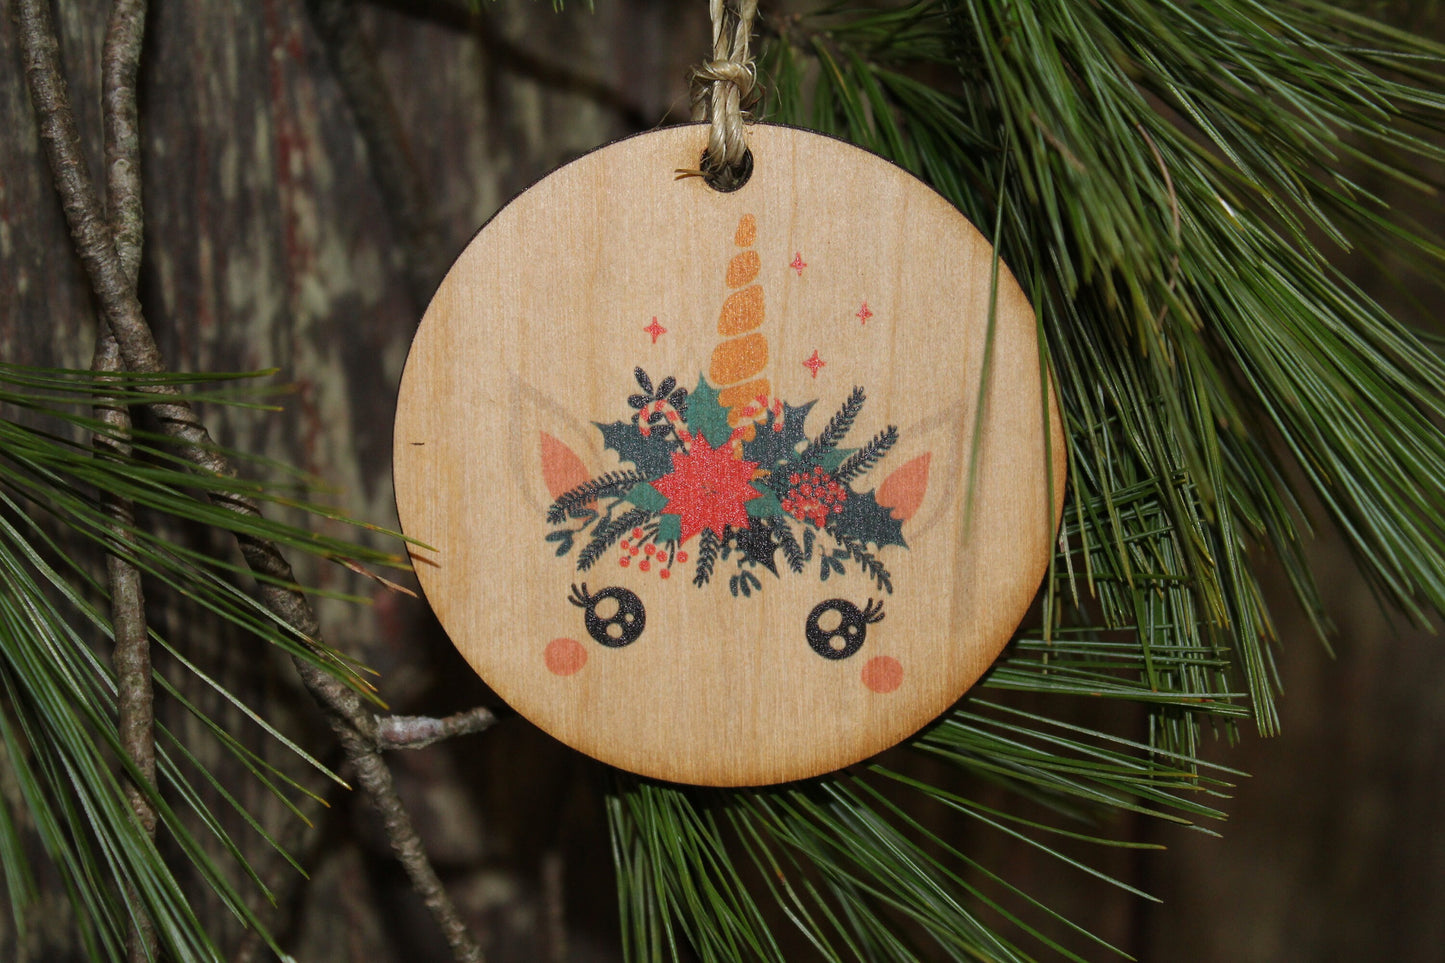 Unicorn Up-close Face Ornament Wood Slice Floral Crown Flowers Crown Primitive Christmas Ornament Rustic Tree Printed